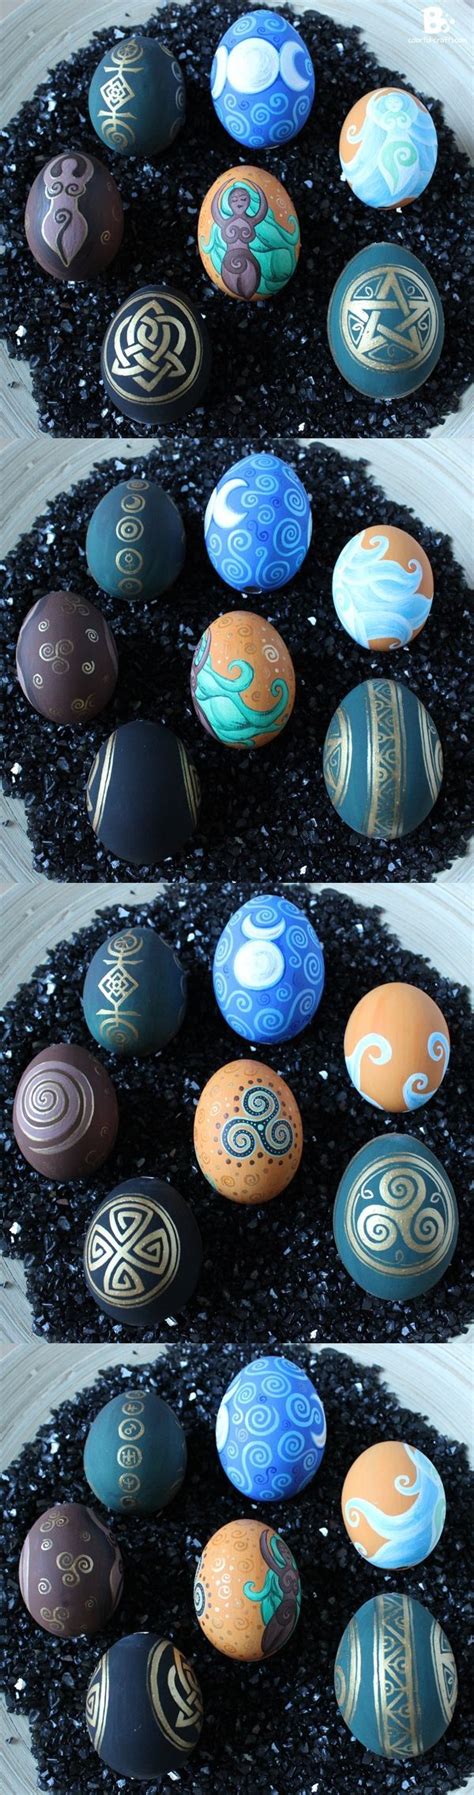 Amazing Ostara Easter Eggs Check Out Colorful Crafts For More Amazing